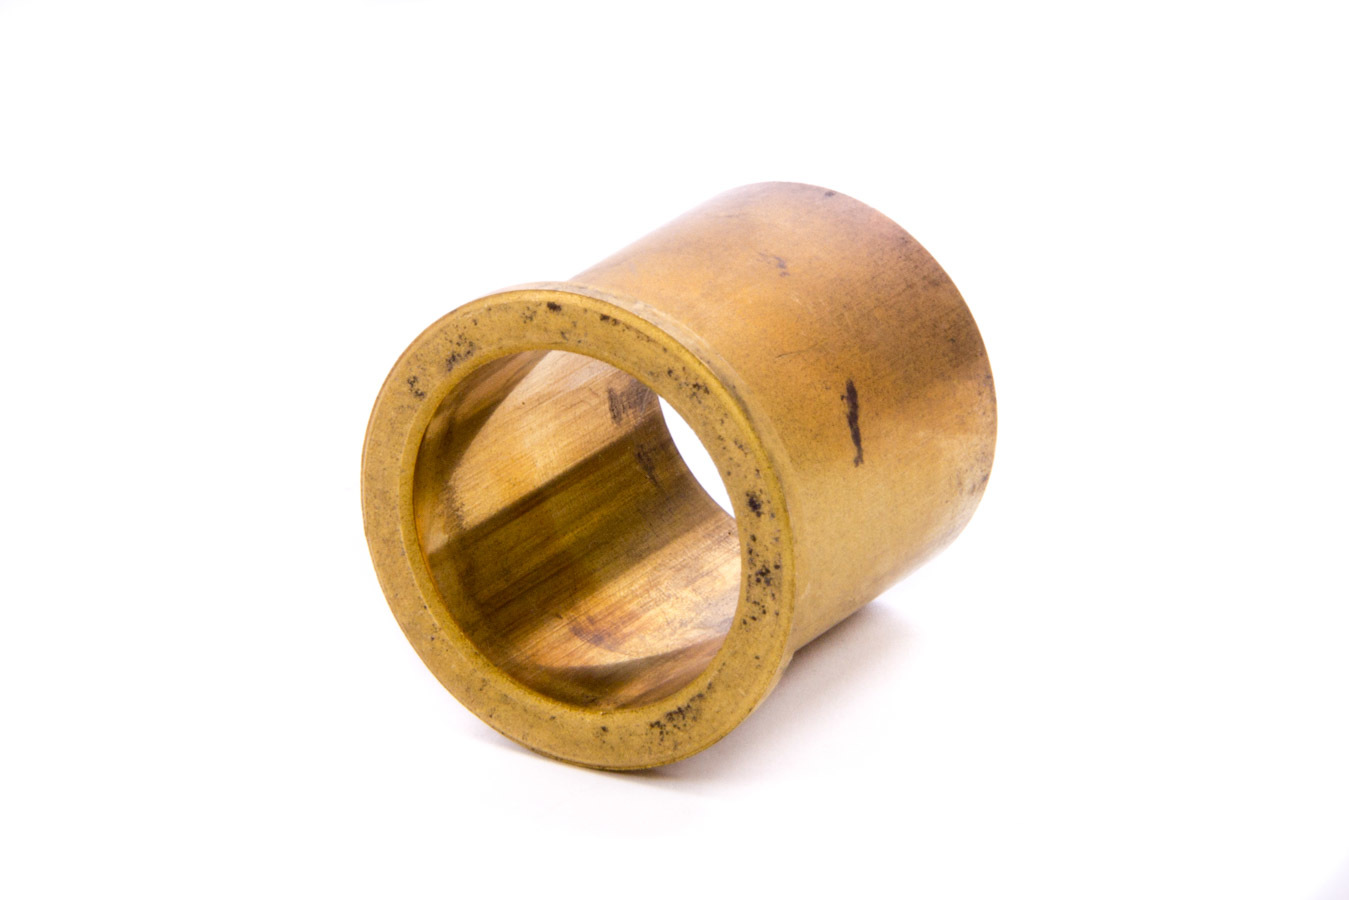 M&W Aluminum Products BB-095 Torsion Bar Bushing, Brass, Natural, 0.095 in Torsion Bars, Each